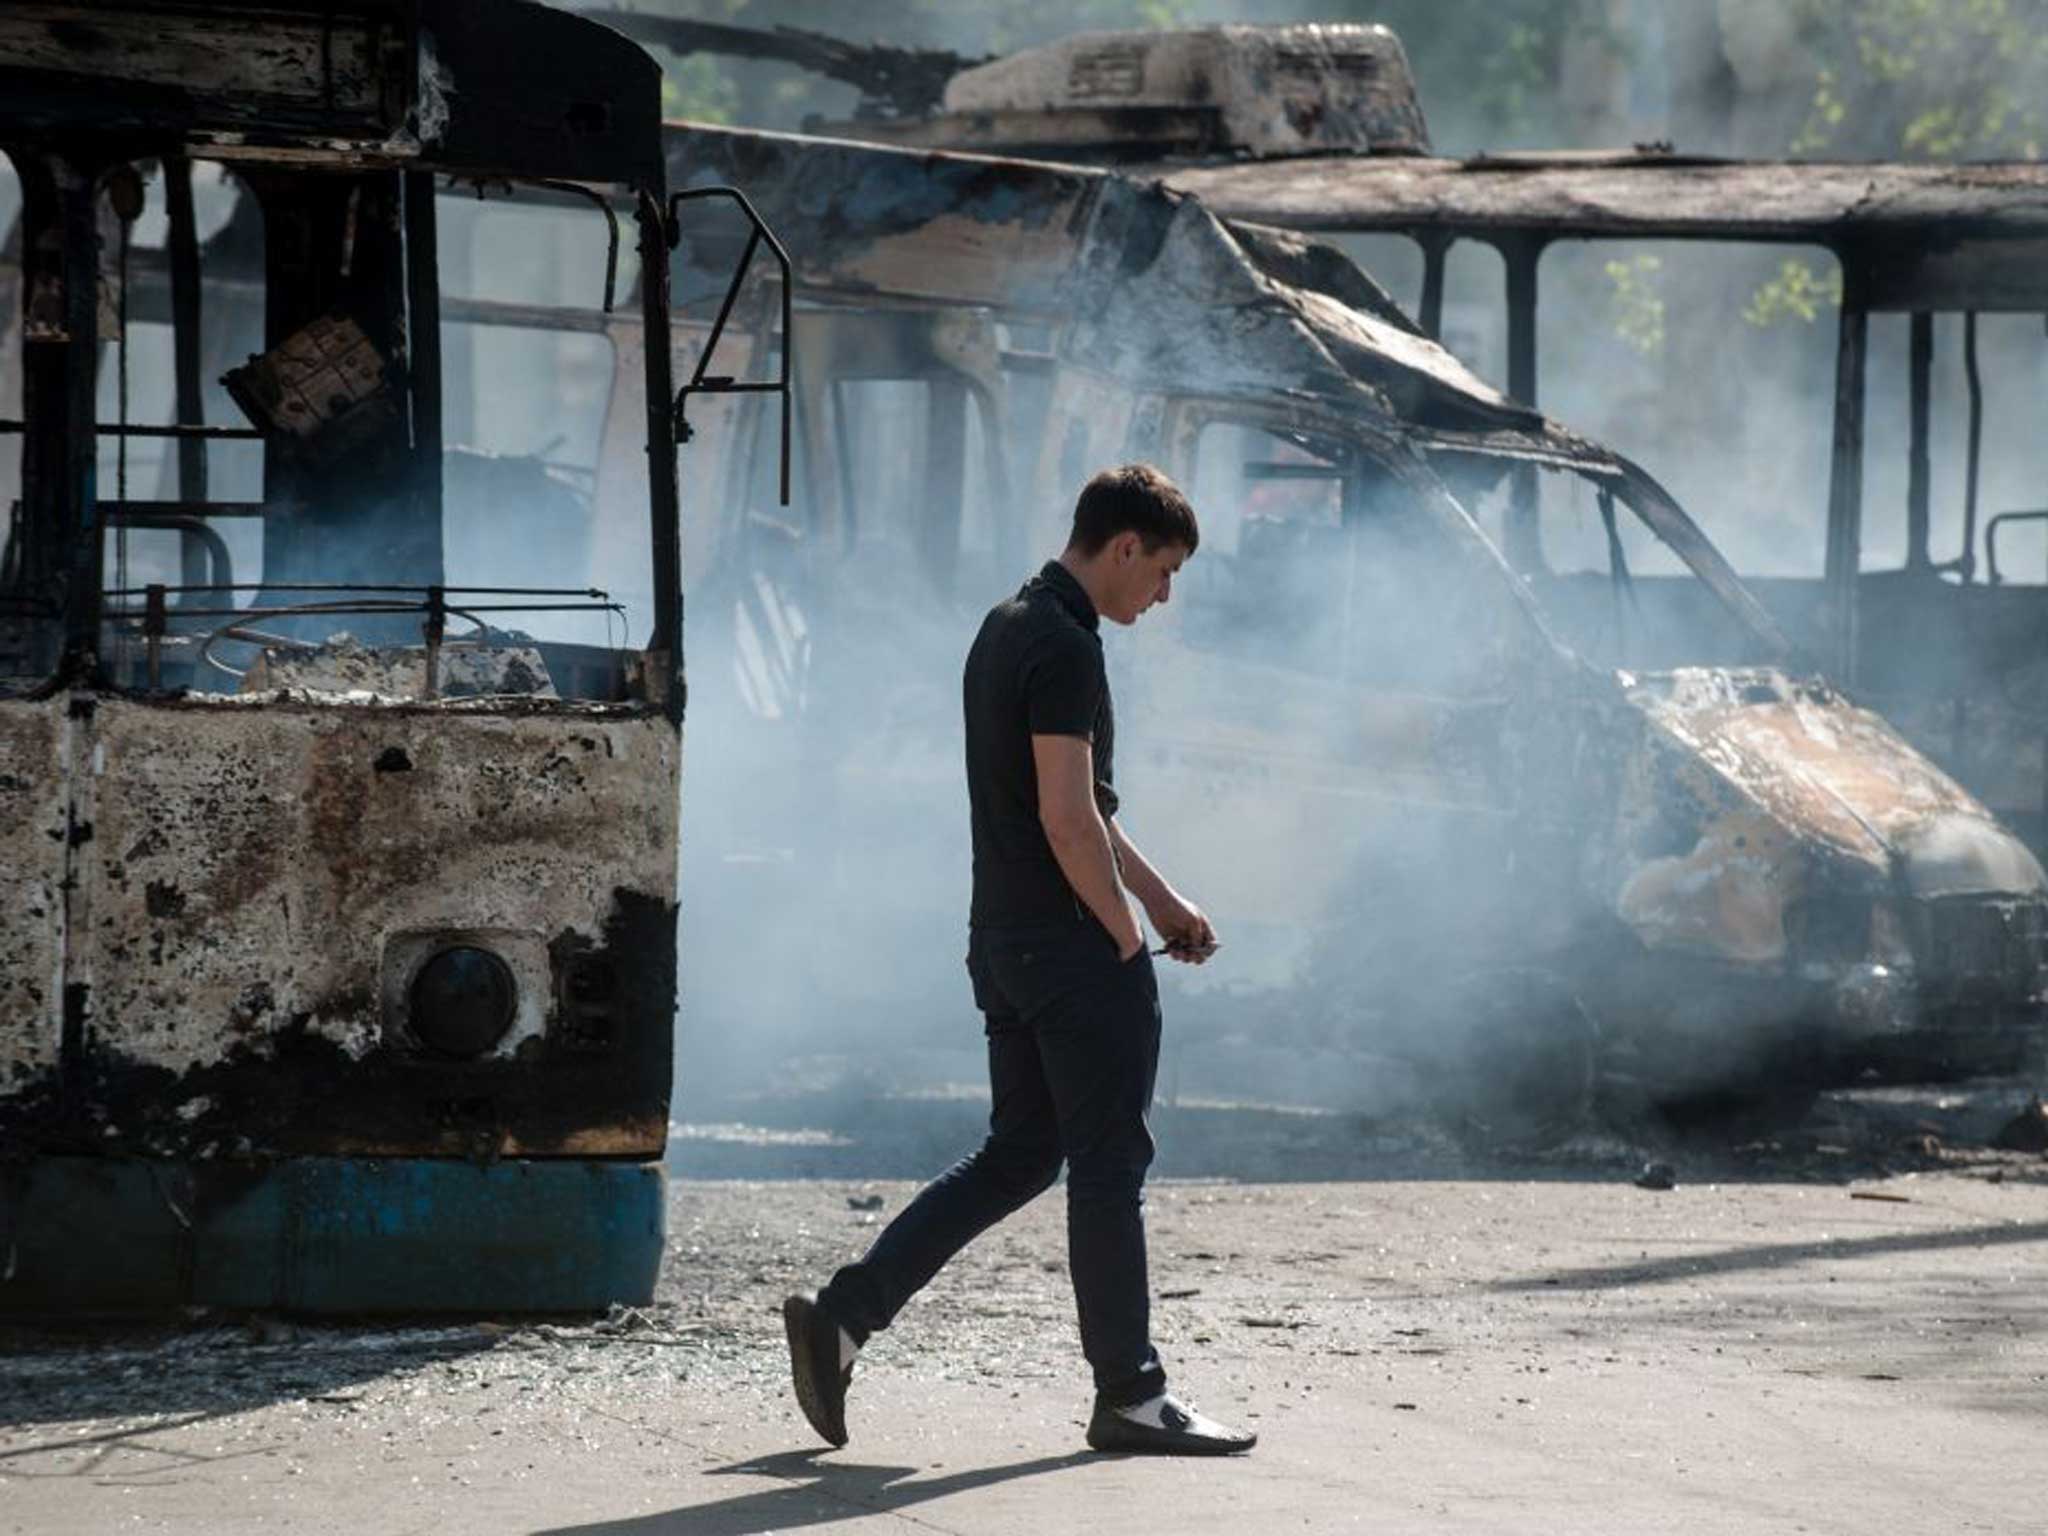 Metal and flesh: A man walks past a charred van and bus in Kramatorsk yesterday